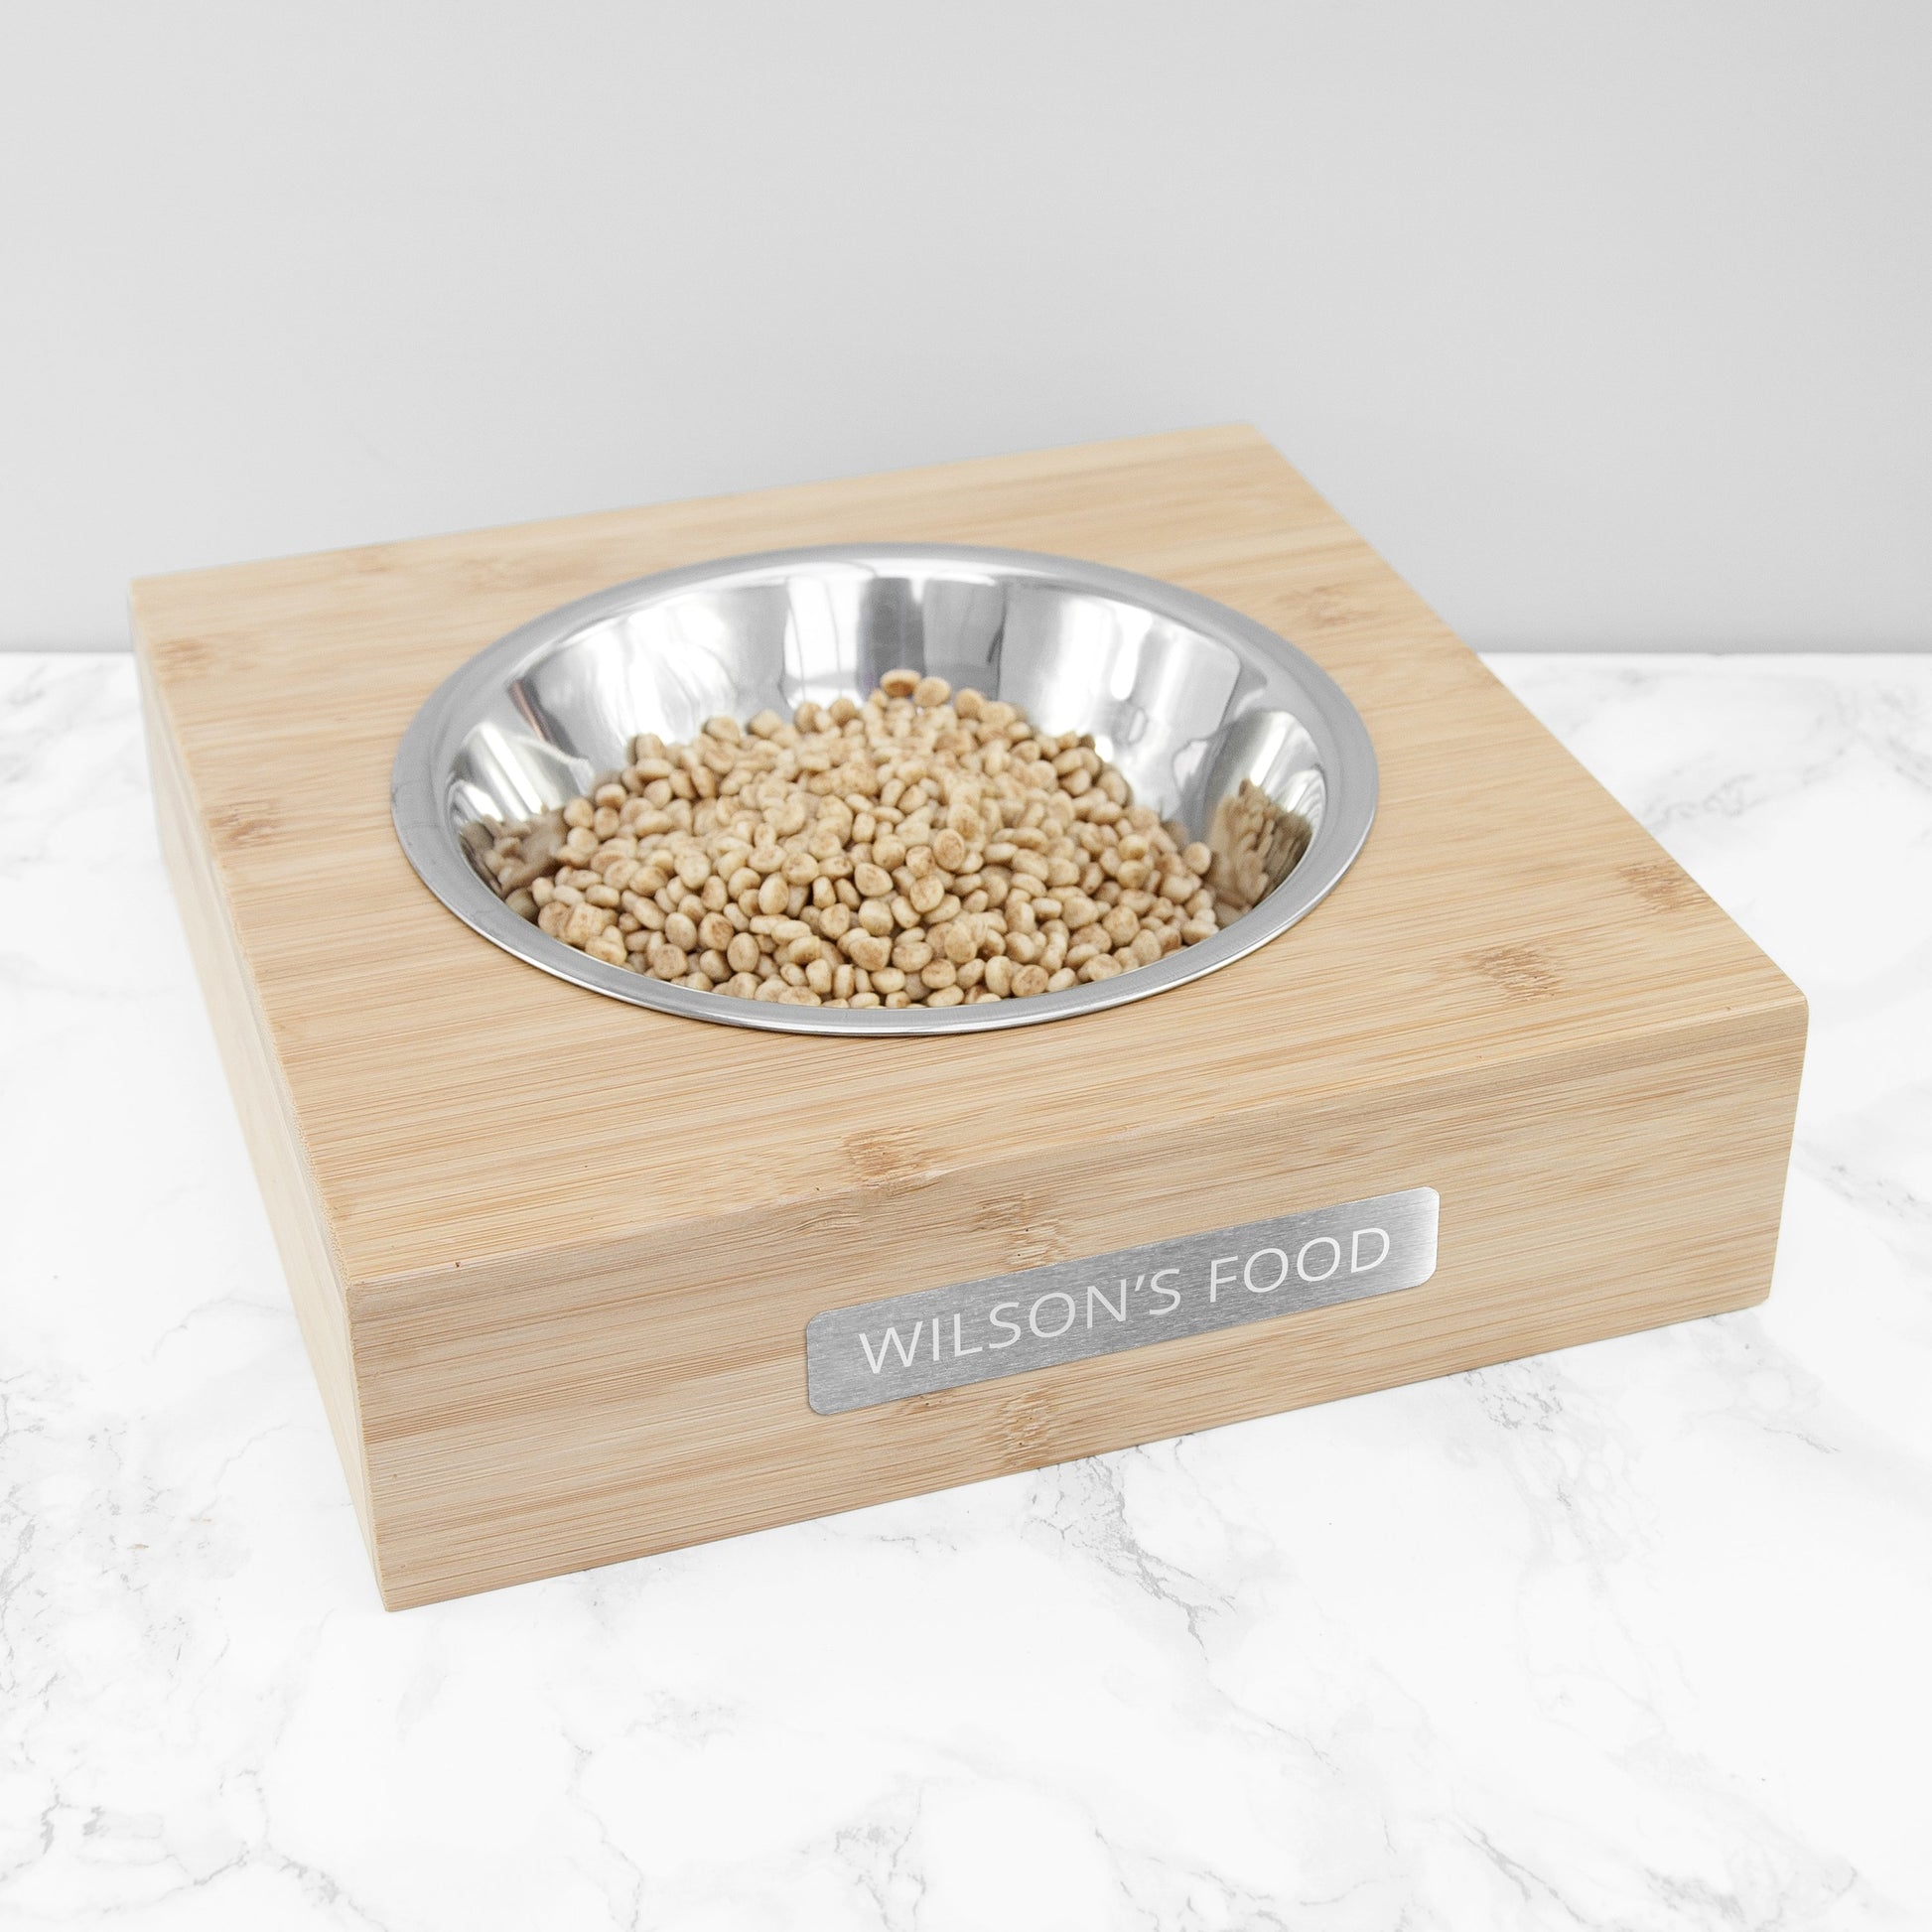 Bamboo base with stainless steel insert pet bowl personalised engraved metal tag By Sweetlea Gifts